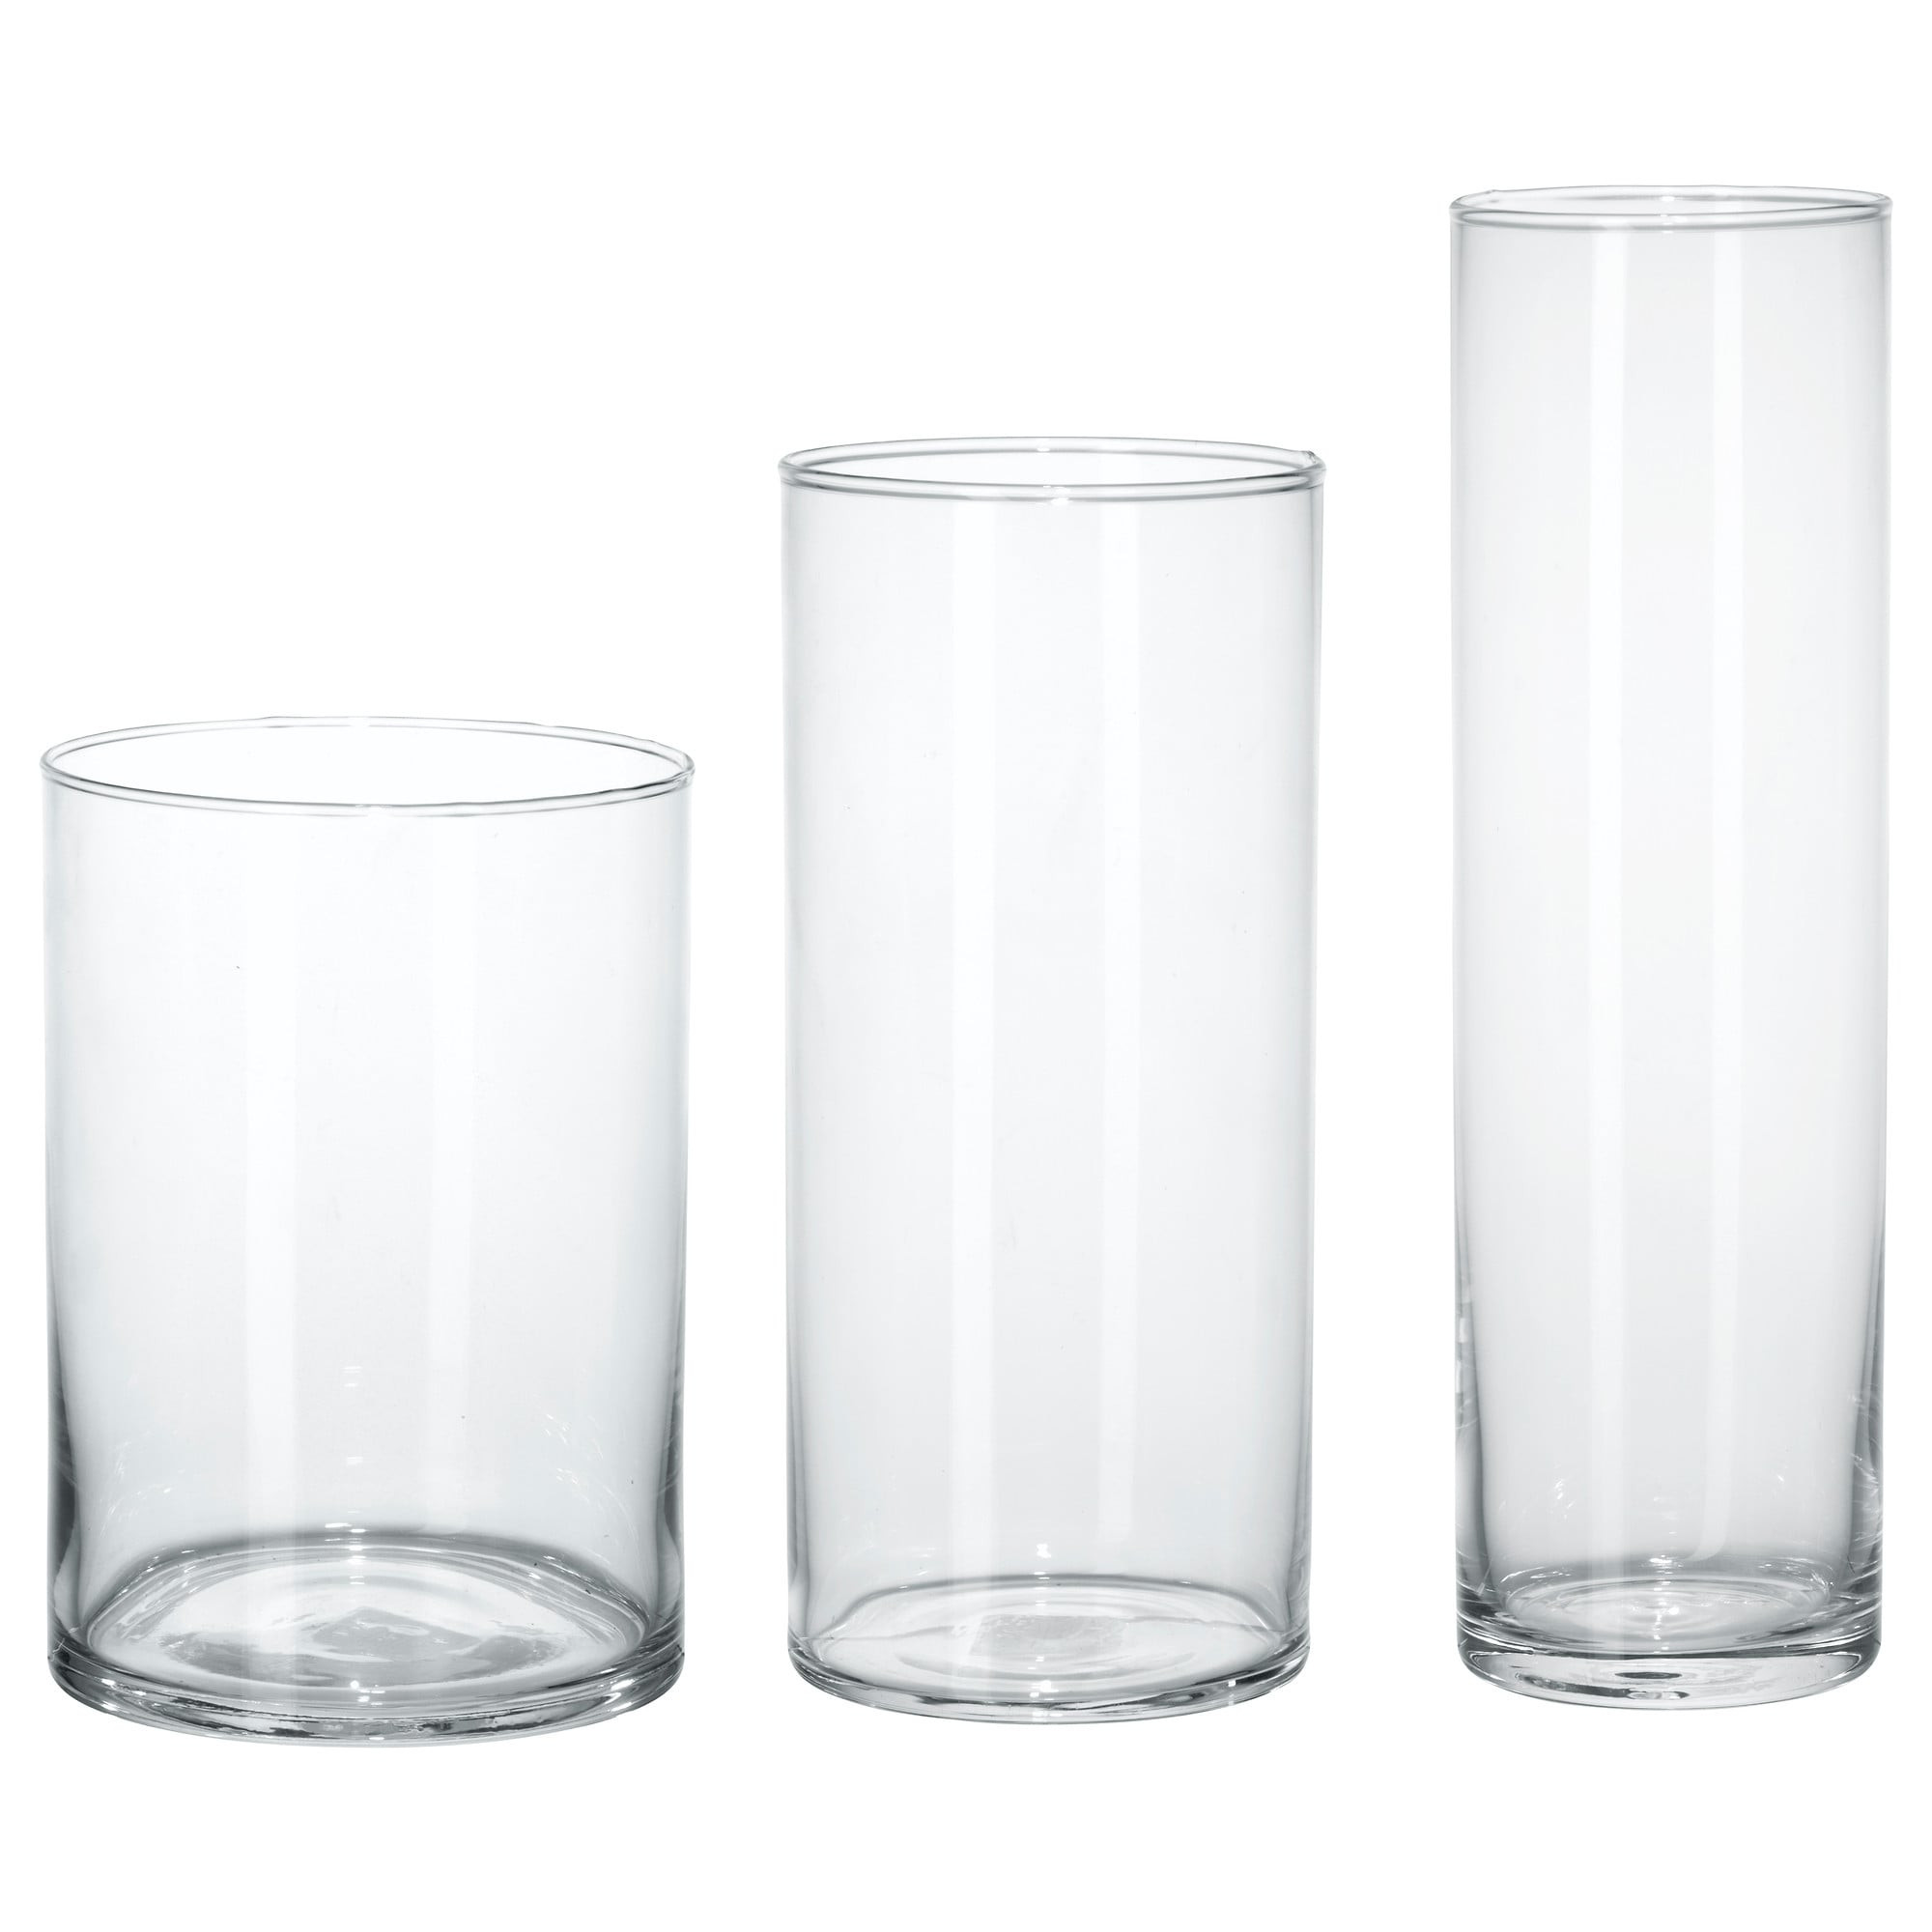 21 Famous Clear Cut Glass Vase 2022 free download clear cut glass vase of cylinder vase set of 3 ikea inside 0106636 pe254891 s5 jpg